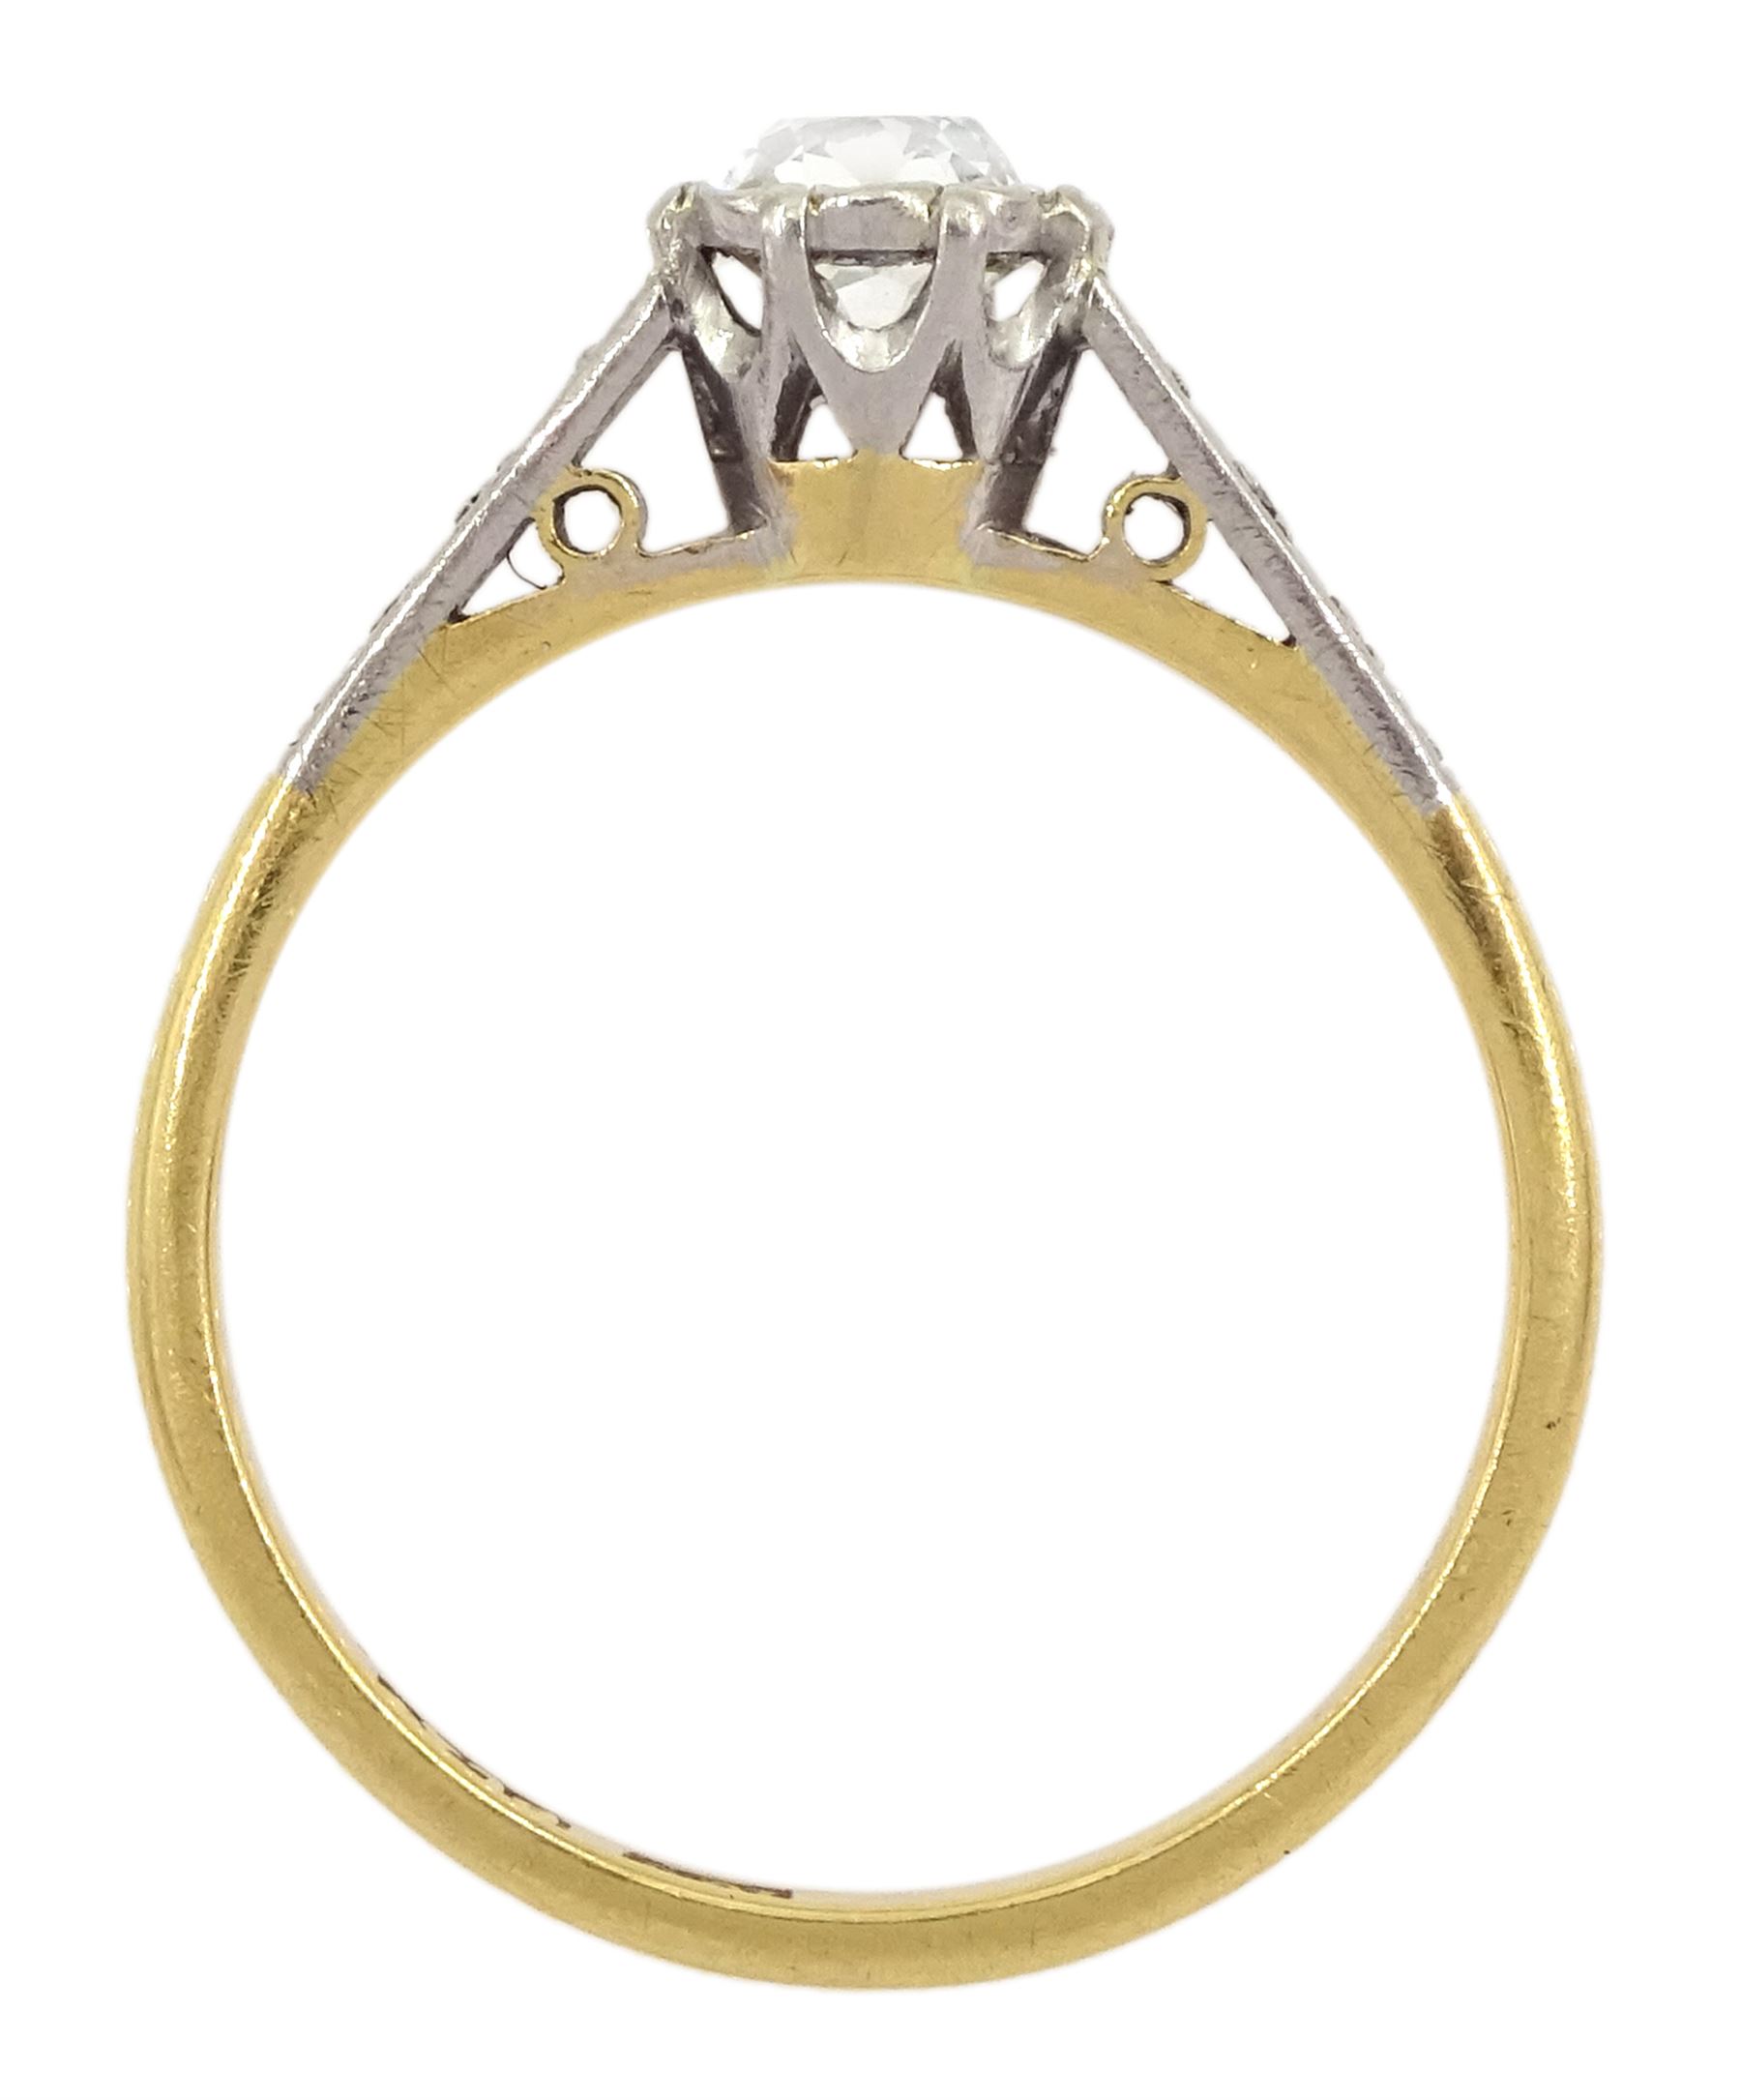 Early 20th century single stone old cut diamond ring - Image 4 of 7